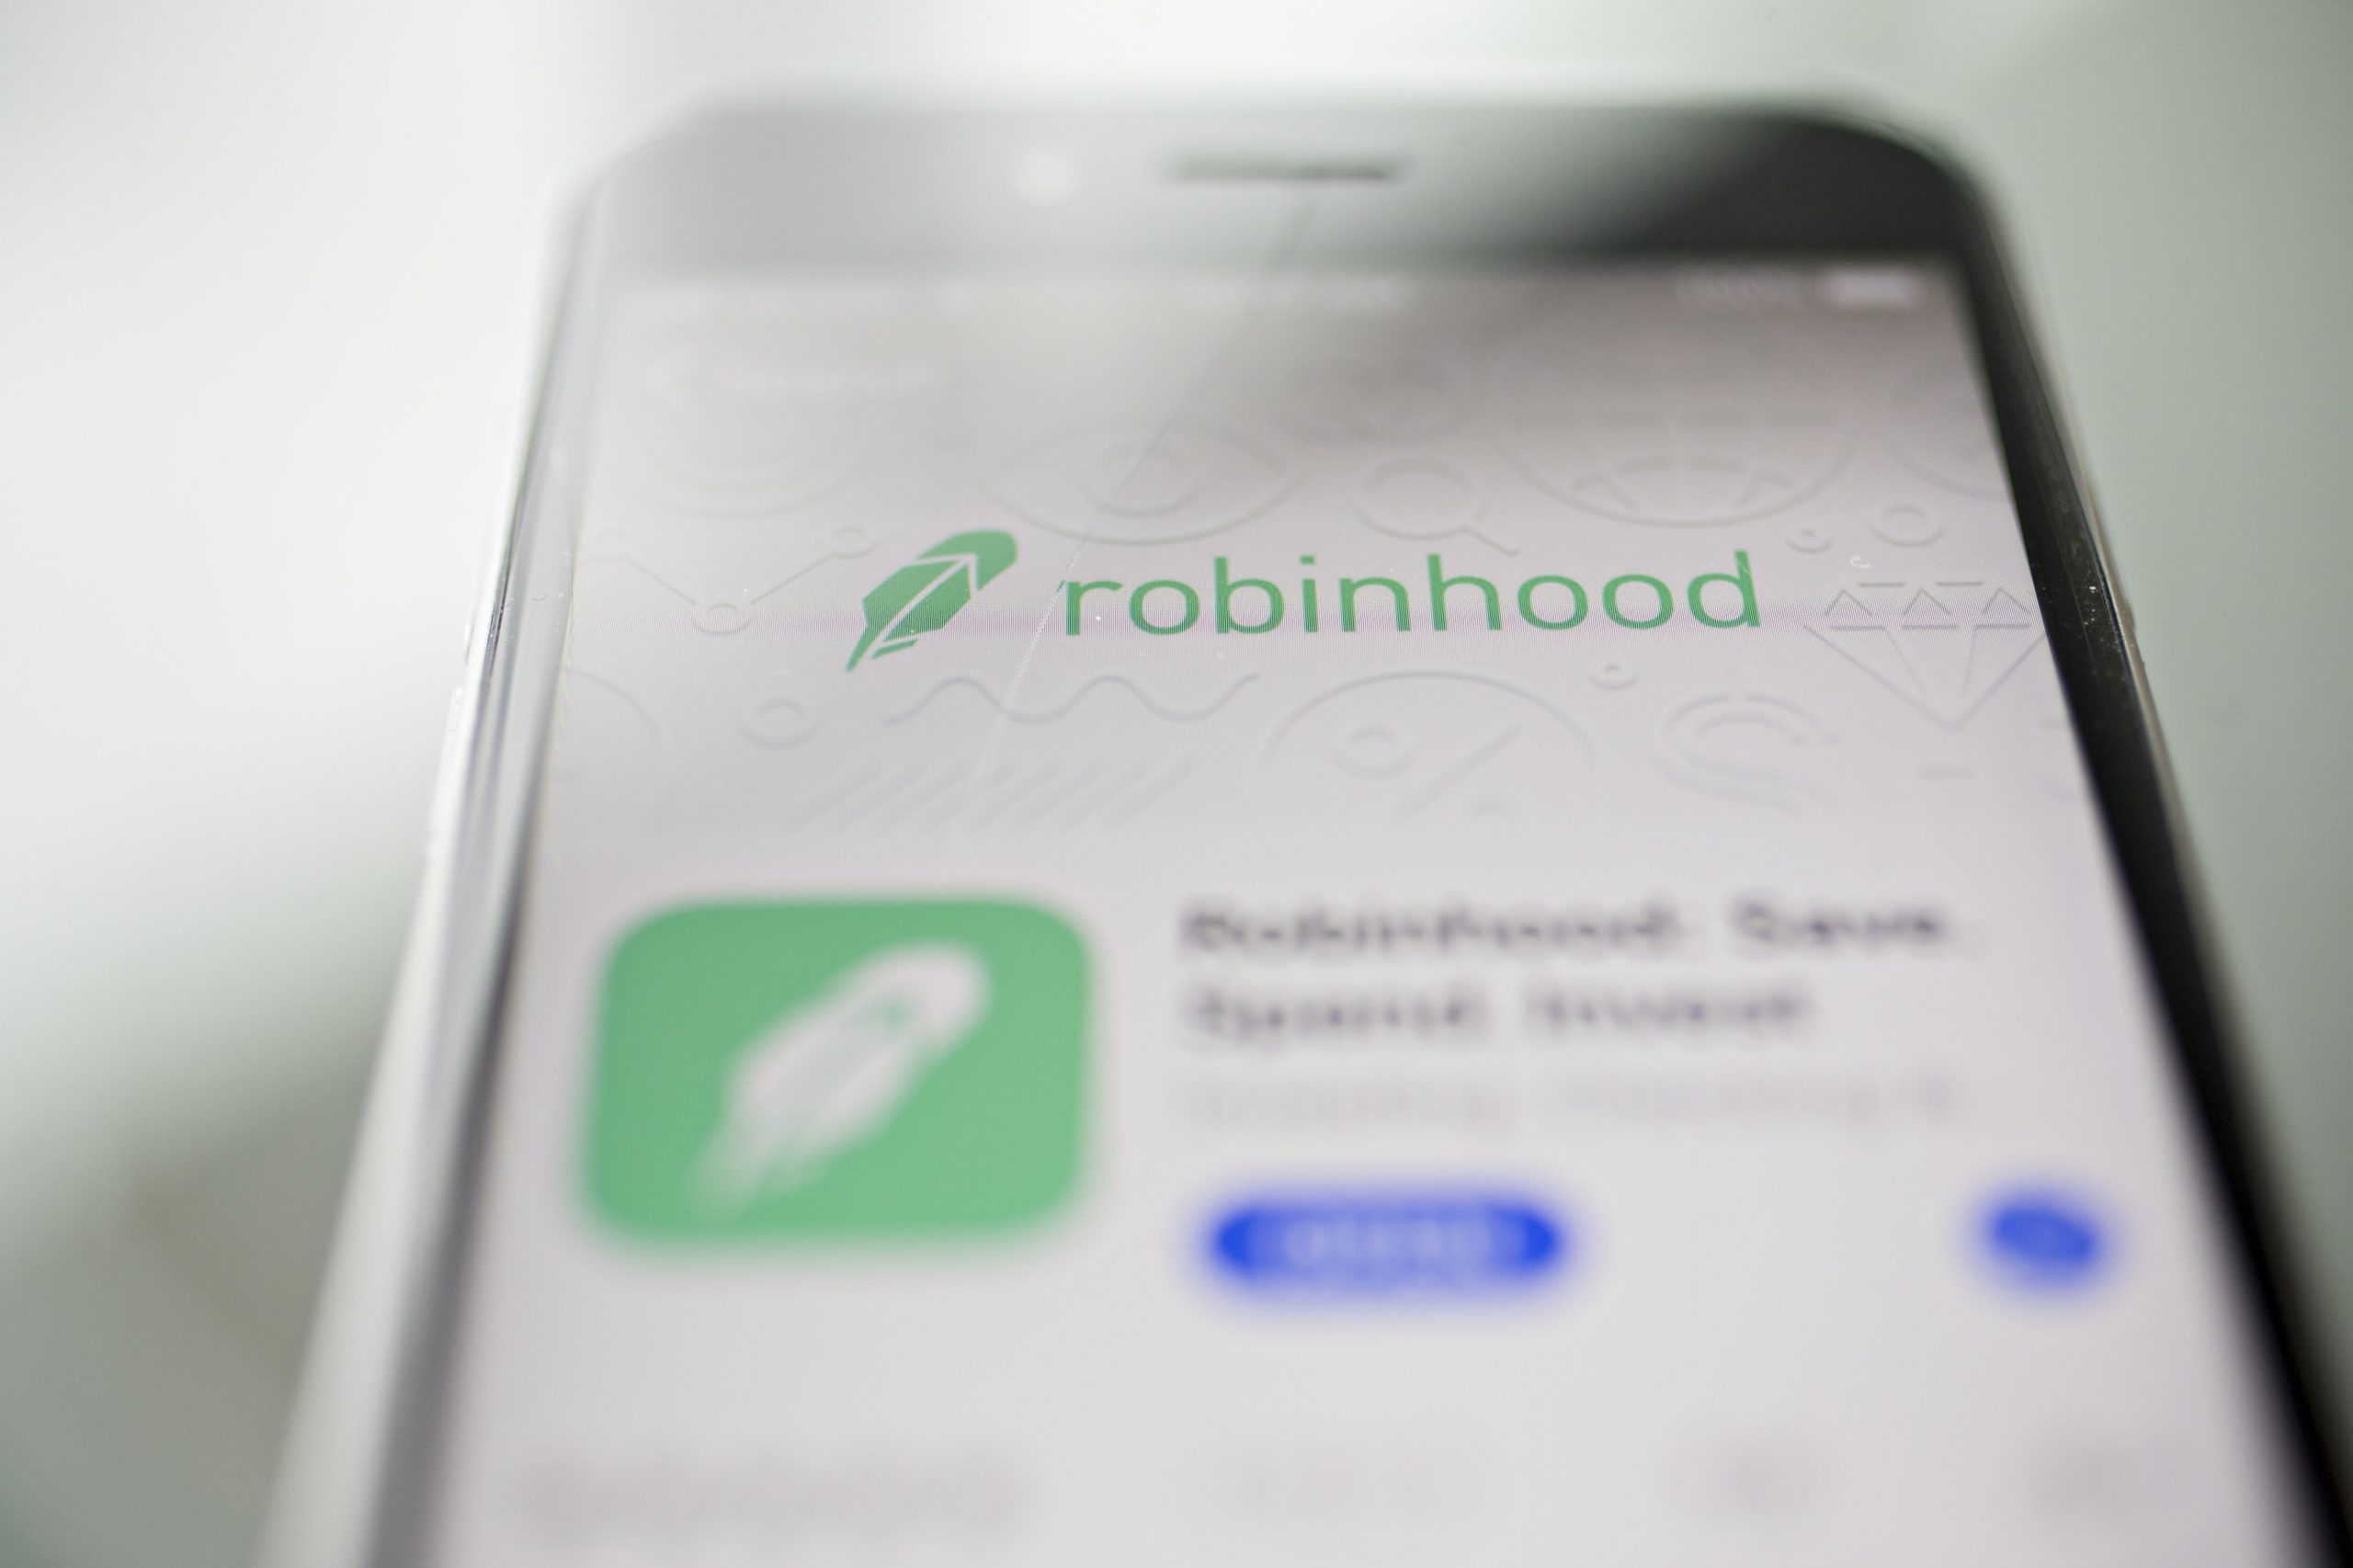 The Robinhood application is displayed in the App Store on an Apple Inc. iPhone in an arranged photograph taken in Washington, D.C., U.S. Photographer: Andrew Harrer/Bloomberg